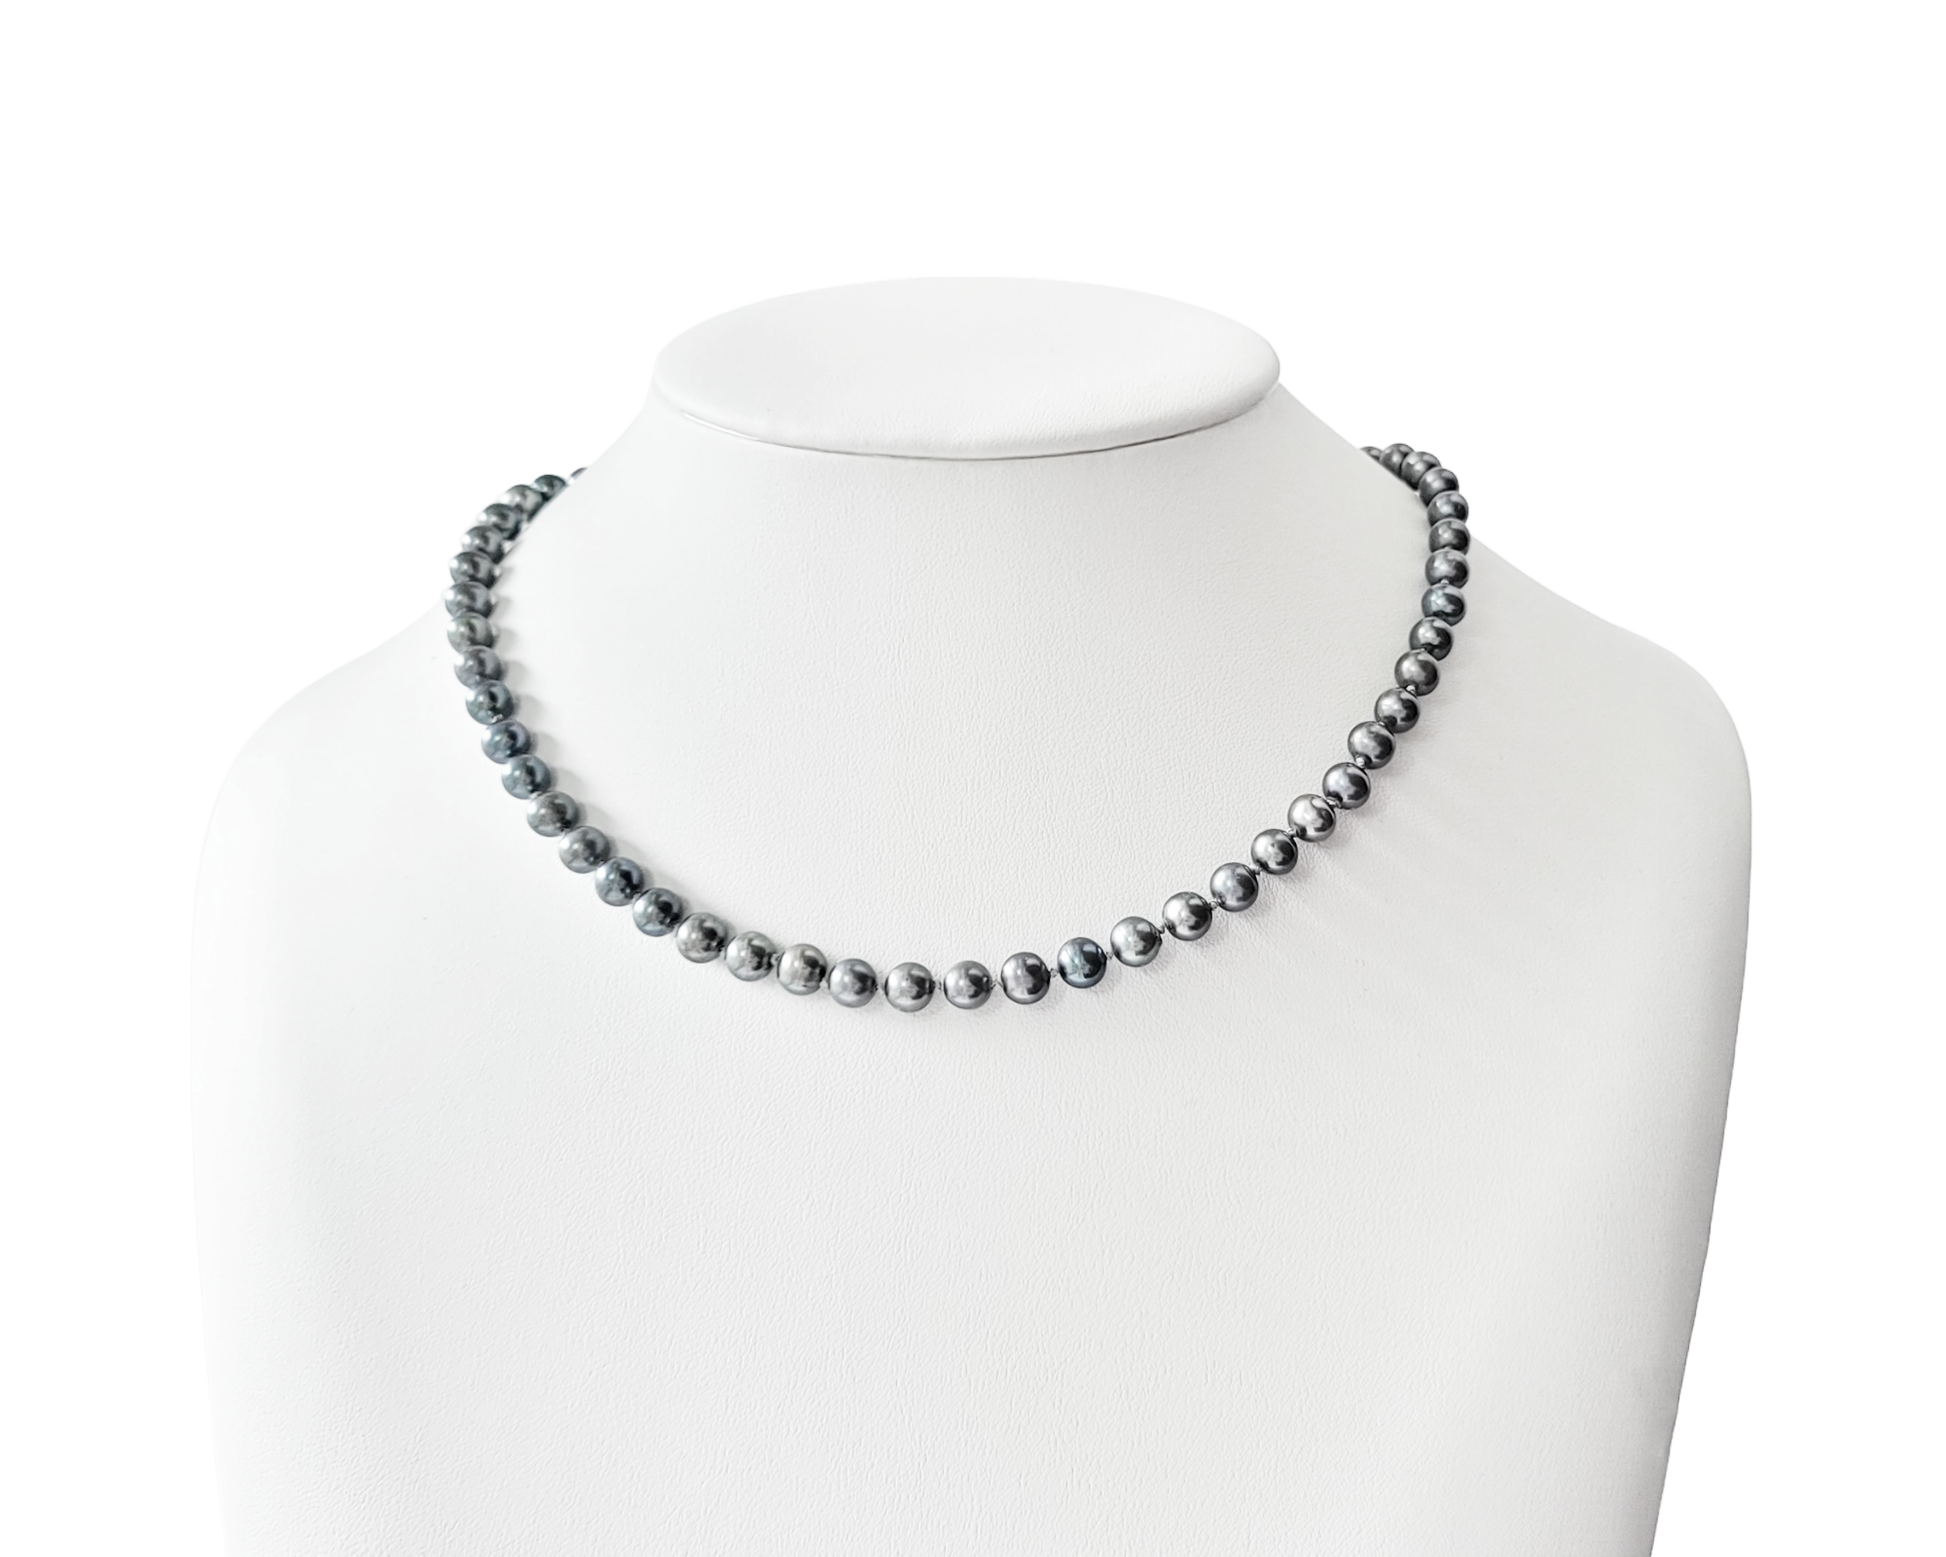 Celestial Brilliance Grey Freshwater Cultured Pearl Necklace, Hand knotted 